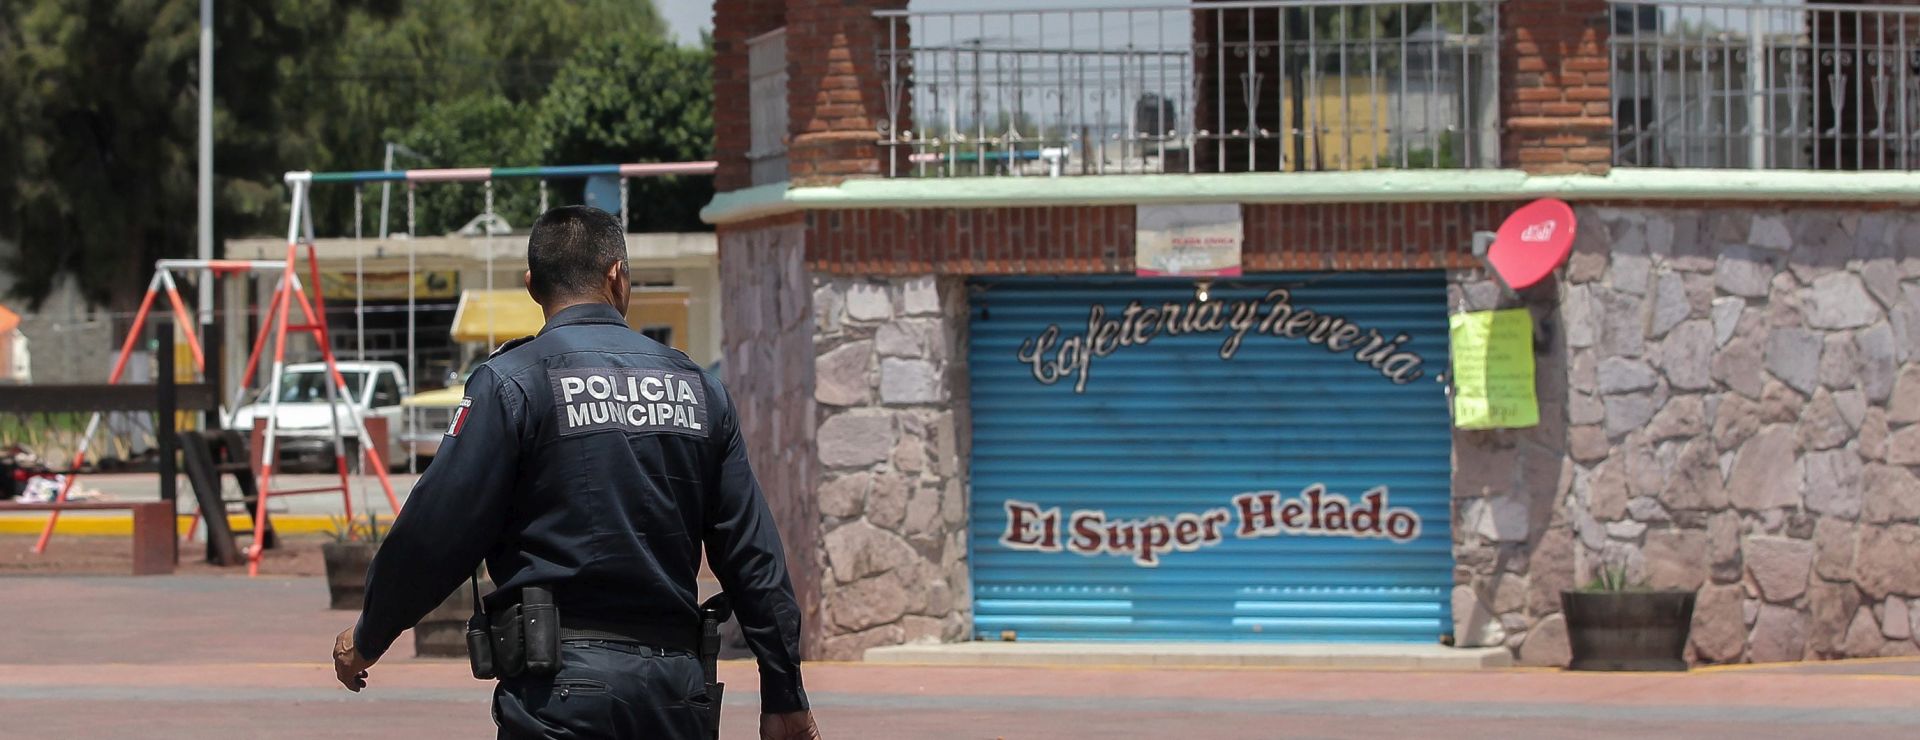 epa05329259 A police officer walks across the deserted central square of Santiago Atlatongo village, Mexico, 25 May 2016, where local residents killed two alleged kidnappers to death on 24 May. The Attorney's General Office explained that 18 people had been arrested for their possible participation in the lynching of three people accused of kidnapping a resident. Three alleged kidnappers were lynched, with two of them suffering fatal wounds after being attacked by hundreds of residents of the community, according to local media reports. Reports on 25 May state that the 18 people who were detained in connection with the lynching have been released.  EPA/ALEX CRUZ